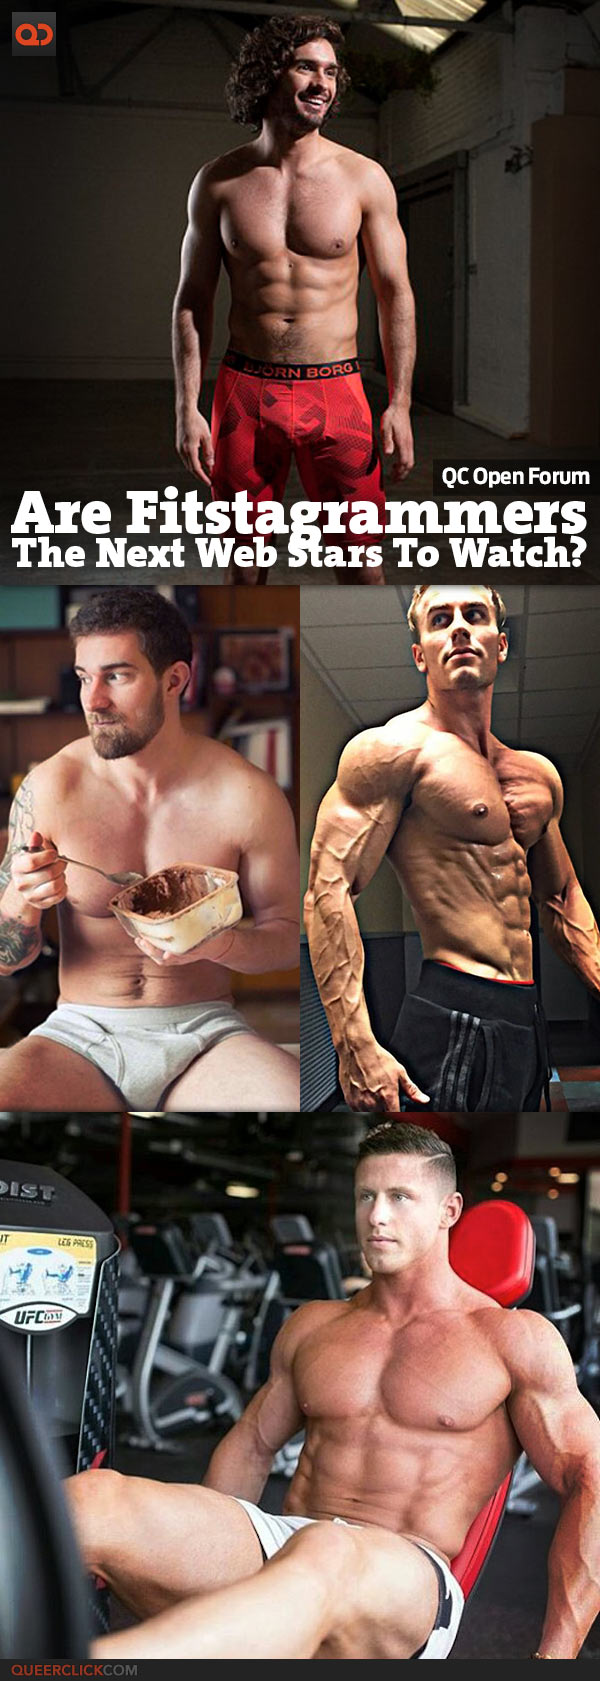 QC Open Forum: Are “Fitstagrammers” The Next Web Stars To Watch?